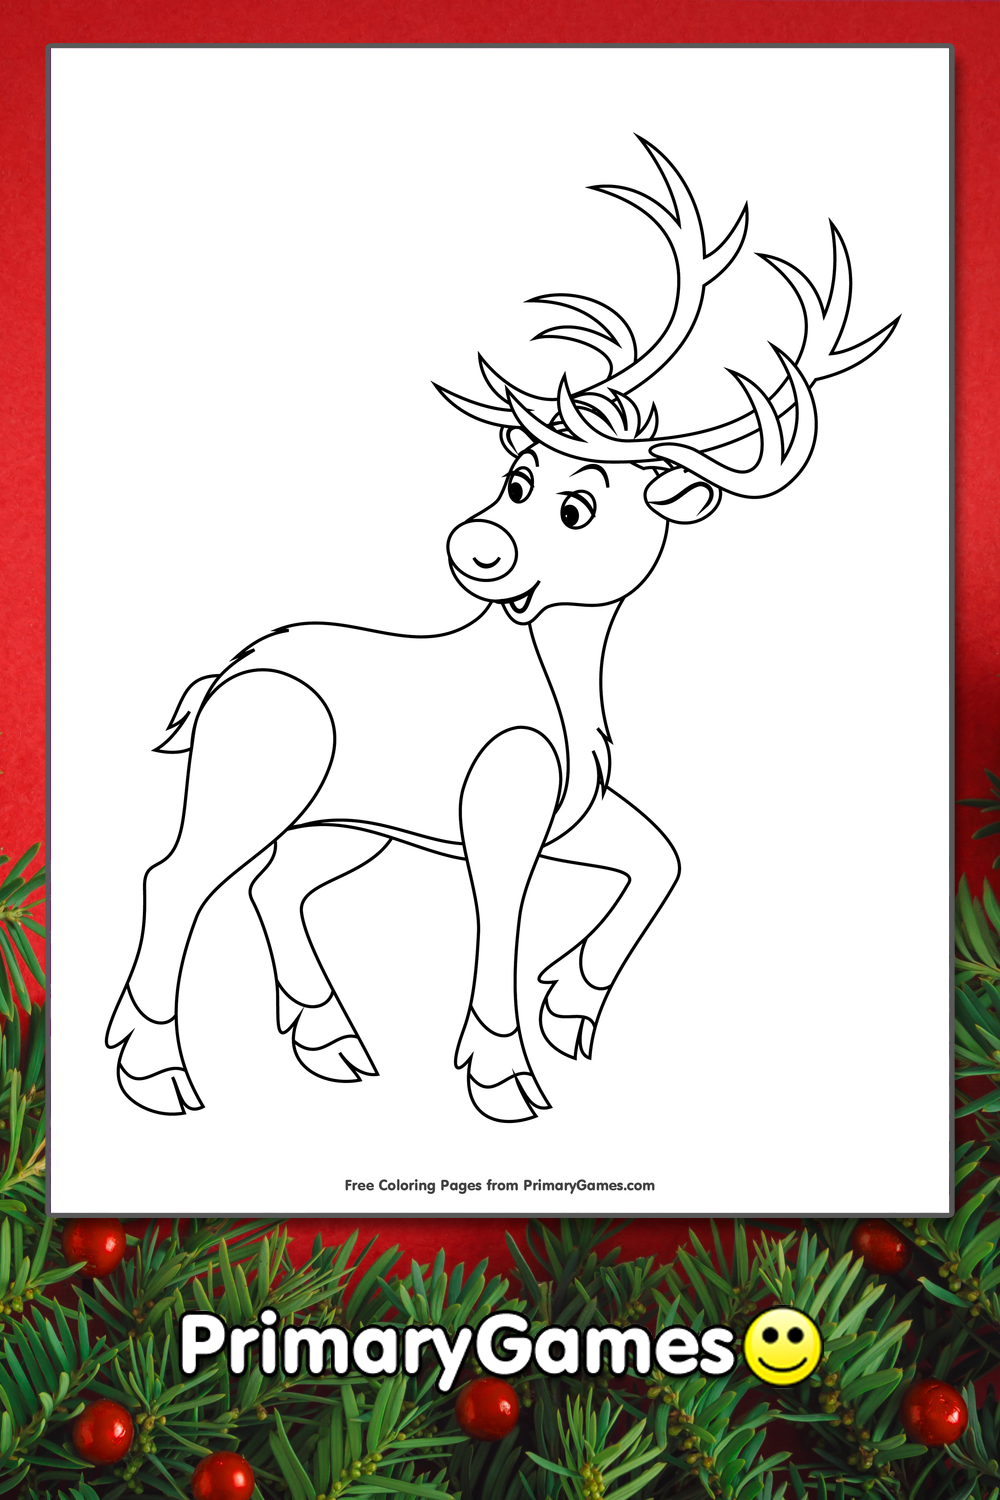 Rudolph the red nosed reindeer coloring page â free printable pdf from